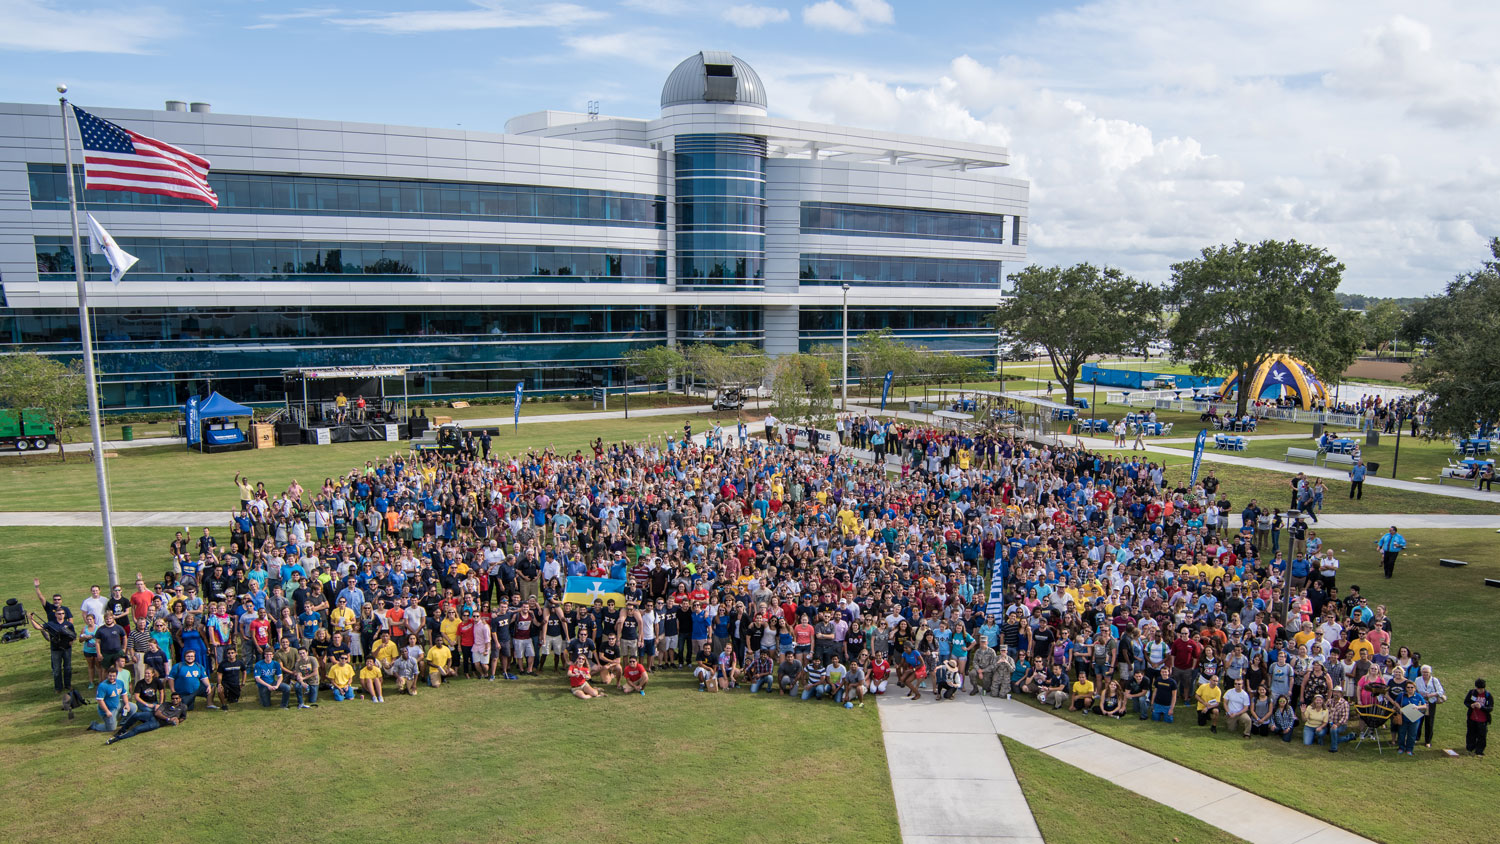 Students, alumni, faculty and staff gathered for a historic all-campus photo at the Operation Bootstrap 50th Anniversary celebration. (Daryl Labello photo)